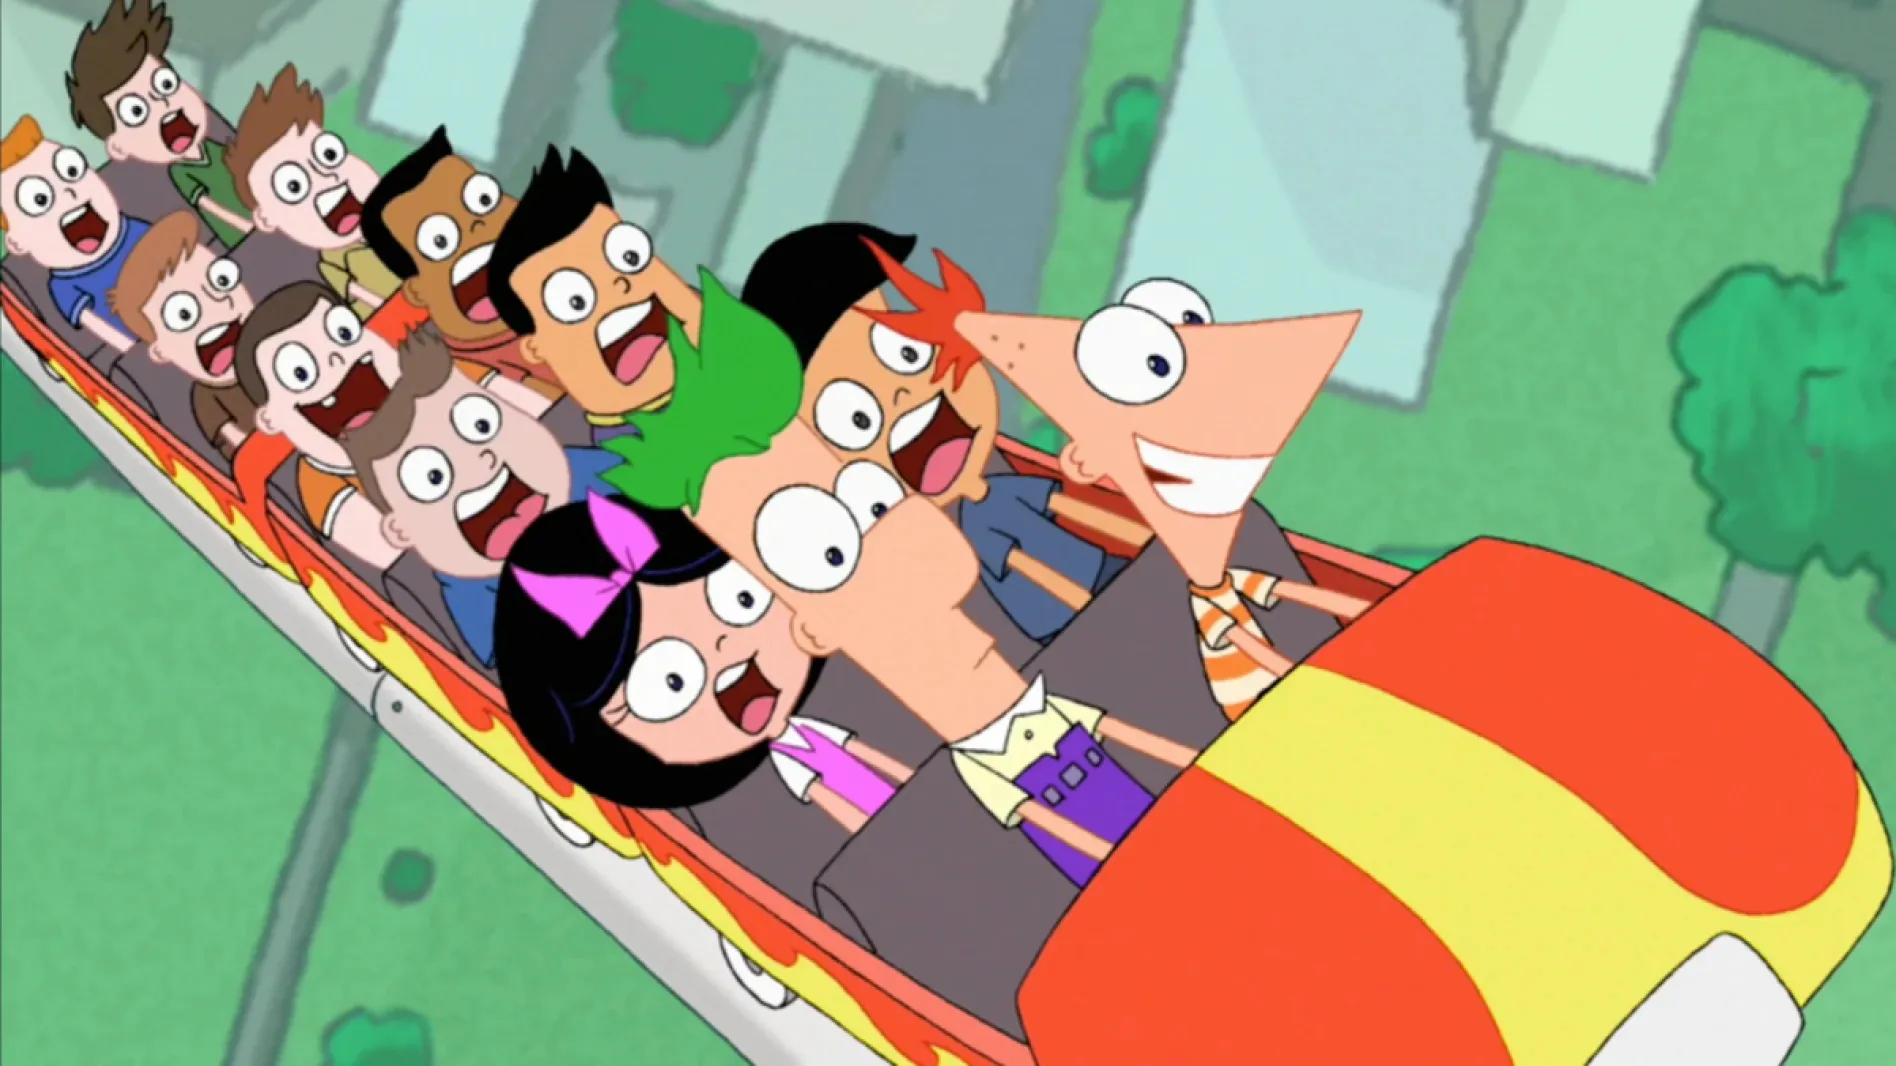 Phineas and Ferb in the show's pilot episode Rollercoaster